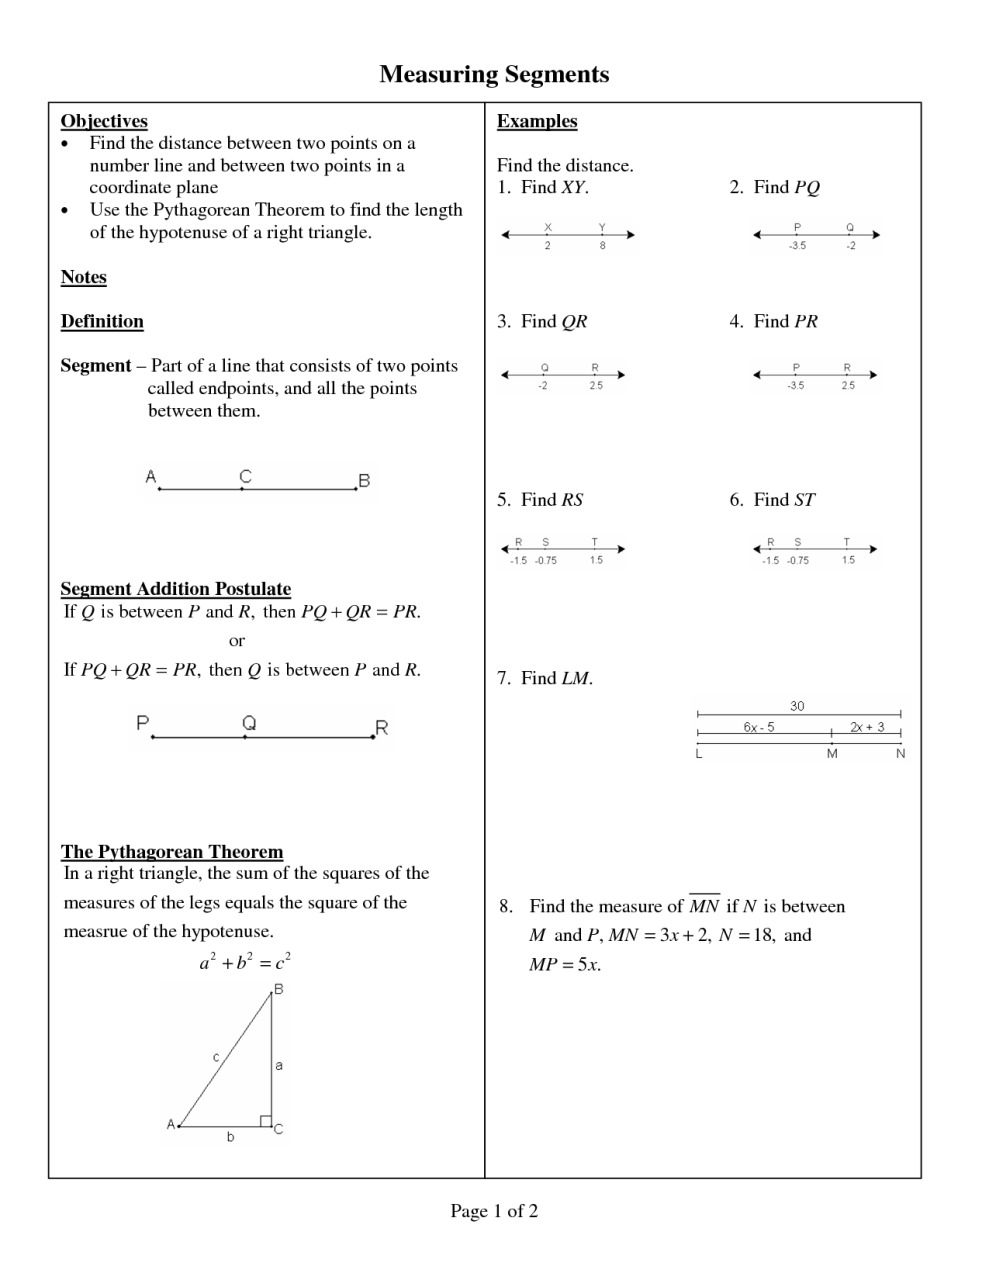 19 Best Images of Measuring Angles Worksheet 6th Grade 6th Grade Math